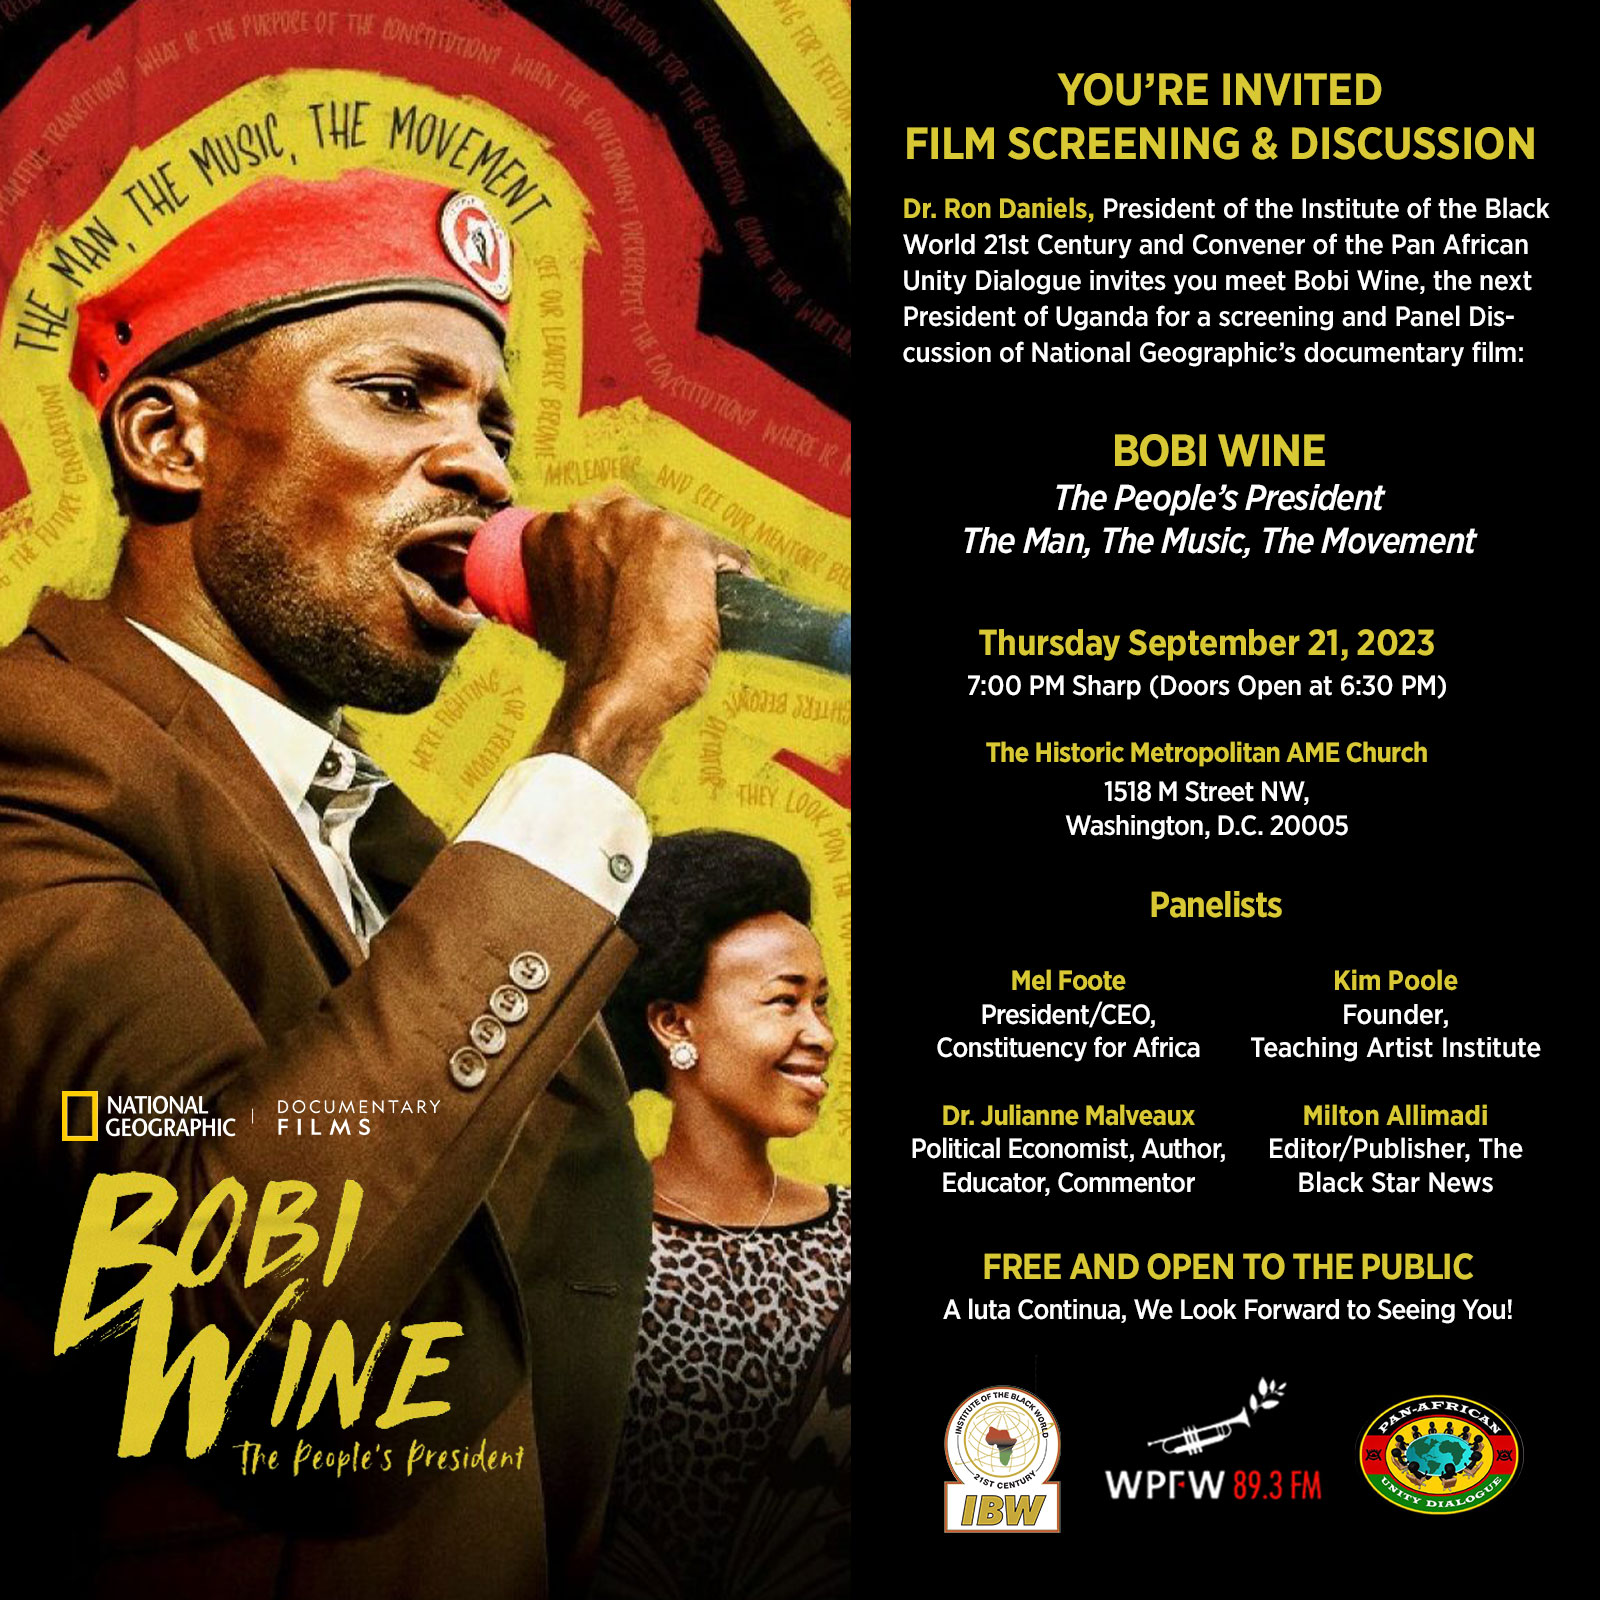 Thursday, September 21, 2023 — Dr. Ron Daniels, President of the Institute of the Black World 21st Century and Convener of the Pan African Unity Dialogue invites you meet Bobi Wine, the next President of Uganda for a screening and Panel Discussion of National Geographic’s documentary film: Bobi Wine, The People’s President, The Man, The Music, the Movement